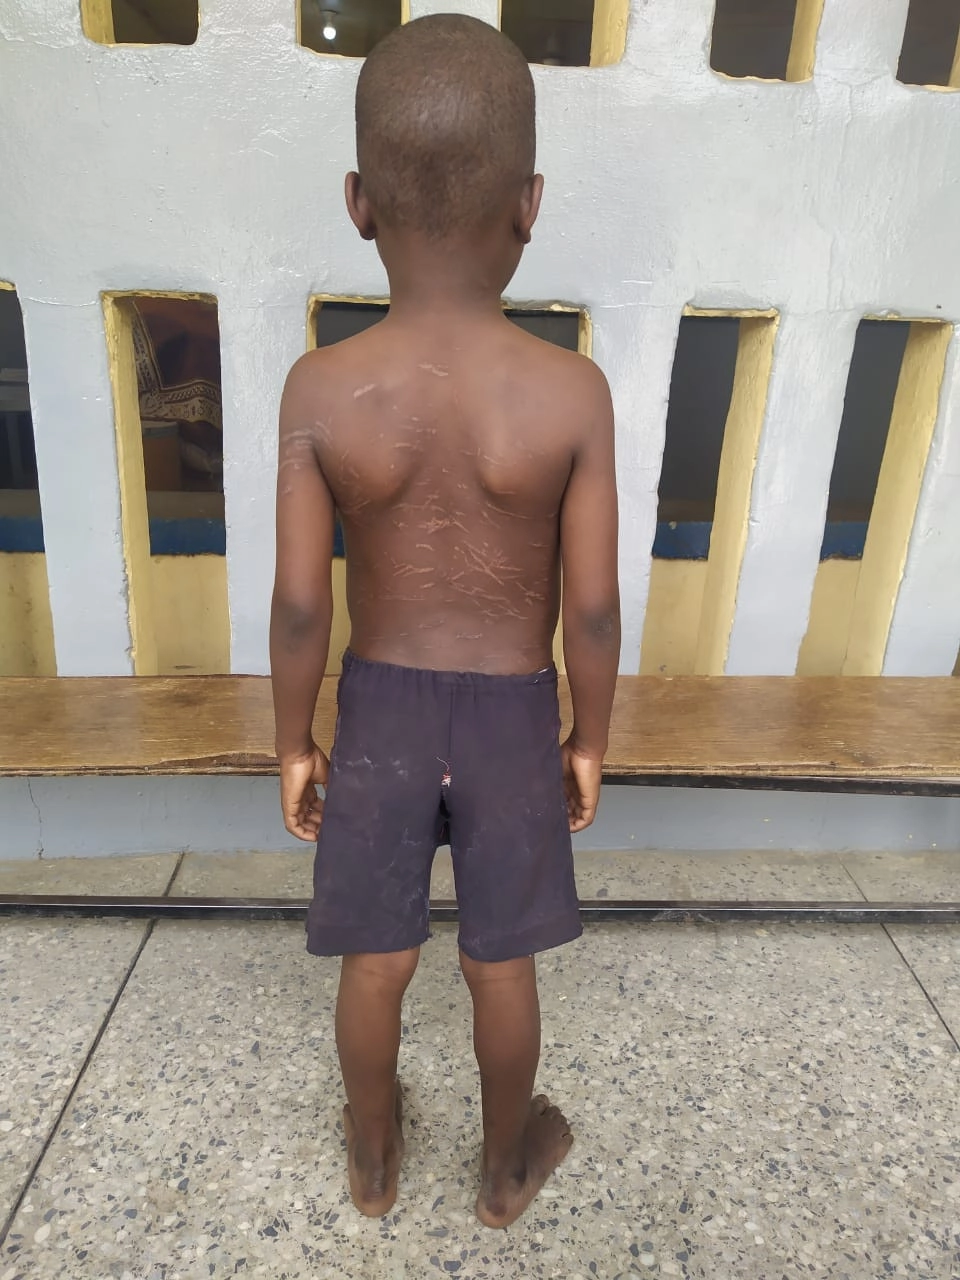 Kano police arrest teacher for gruesome torture of 8-year-old boy